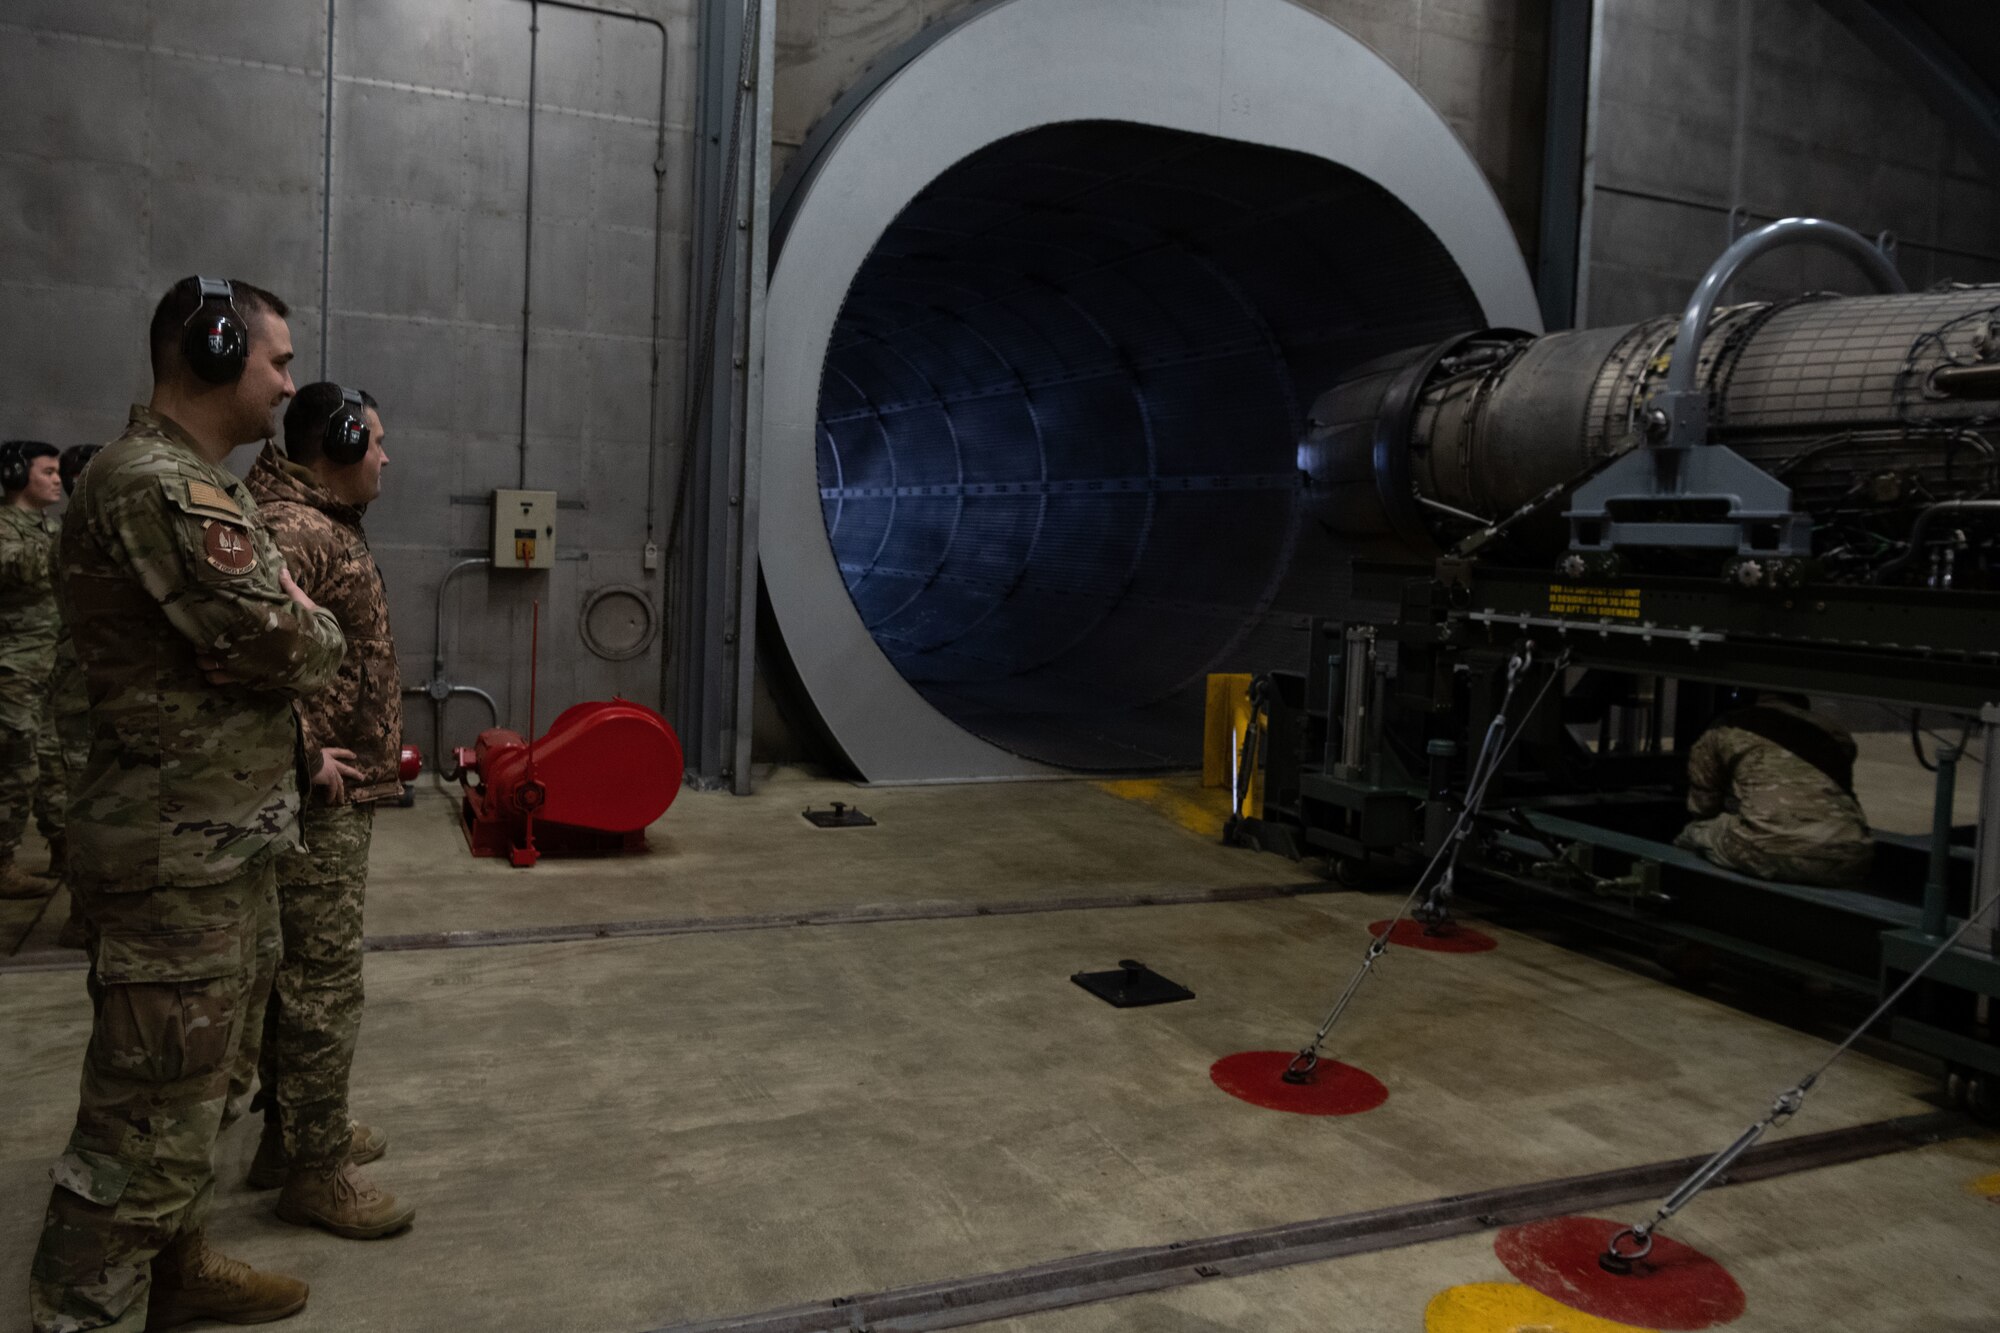 Chief Master Sgt. of the Air Force of the Armed Forces of Ukraine Kostiantyn Stanislavchuk watches an F-16 engine blast into an engine test cell.